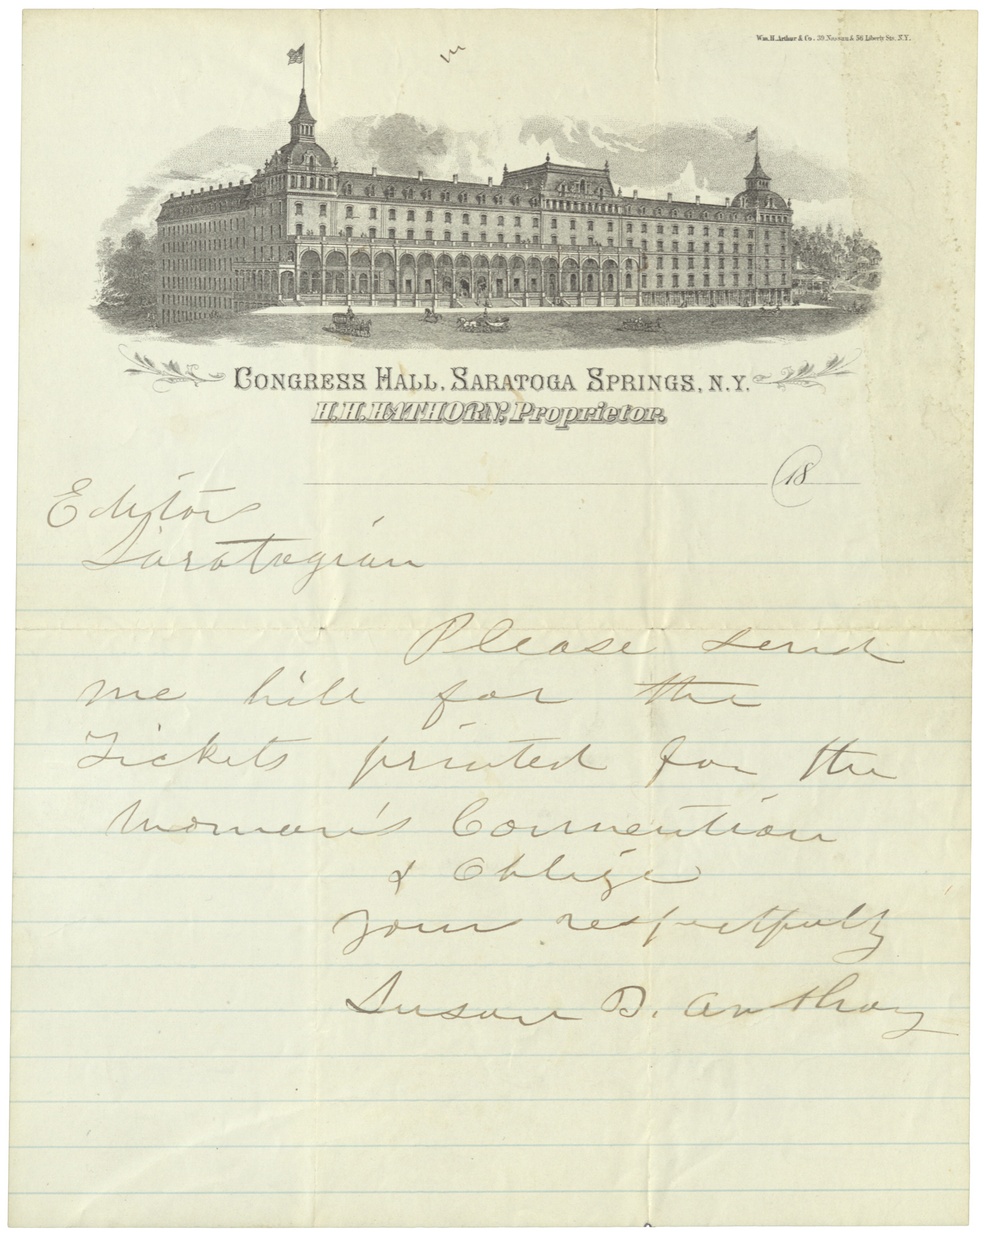 A yellowed and creased hand-written letter on letterhead that features a lithograph of a large colonnaded building and printed words “Congress Hall, Saratoga Springs, N.Y / H.H. Hathorn, Proprietor.”